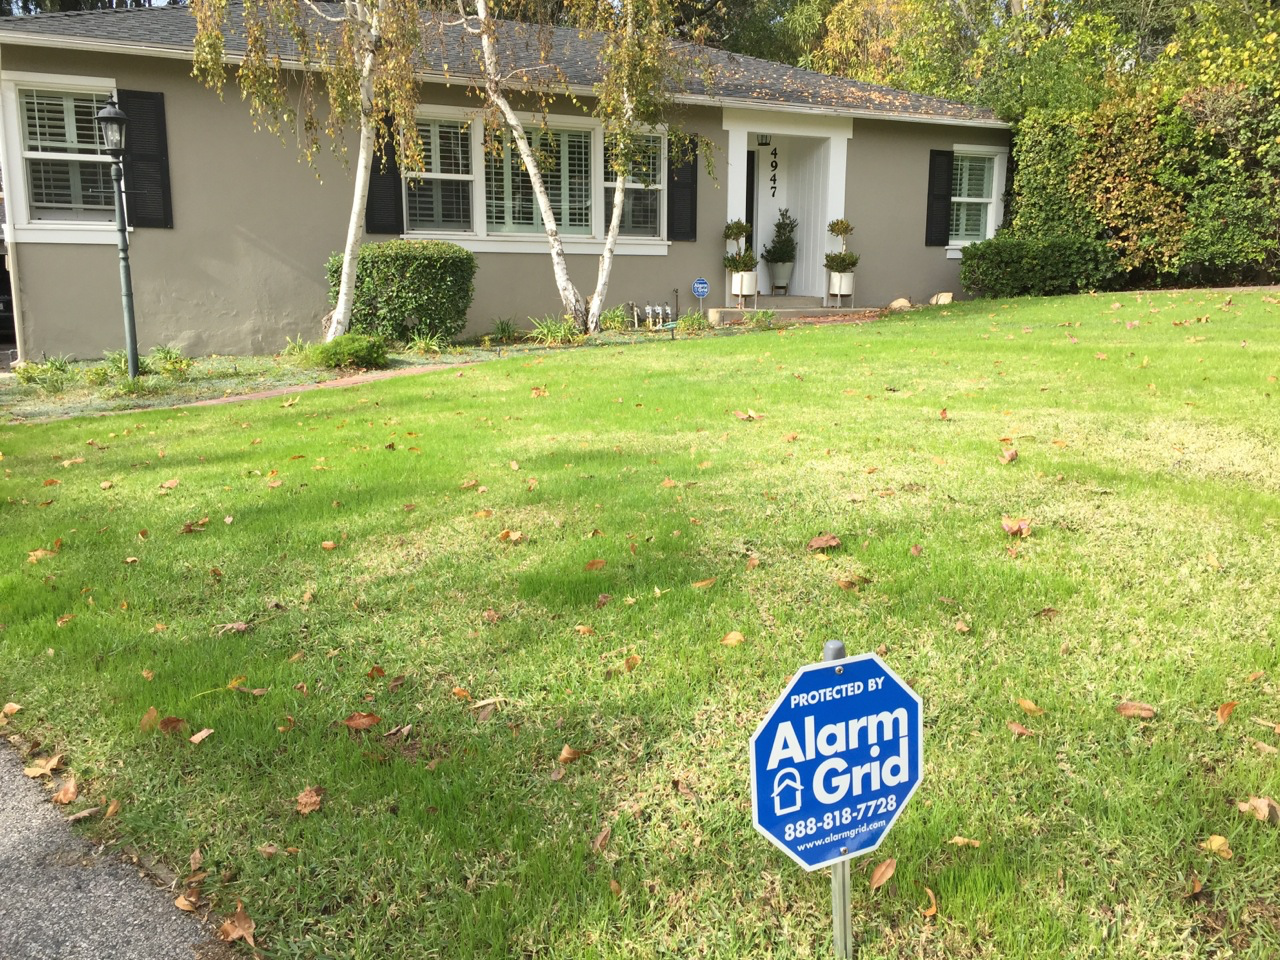 "Alarm Grid manages to provide a level of individualized service that I would only expect from a local company" -Joe P. from La Cañada Flintridge, CA